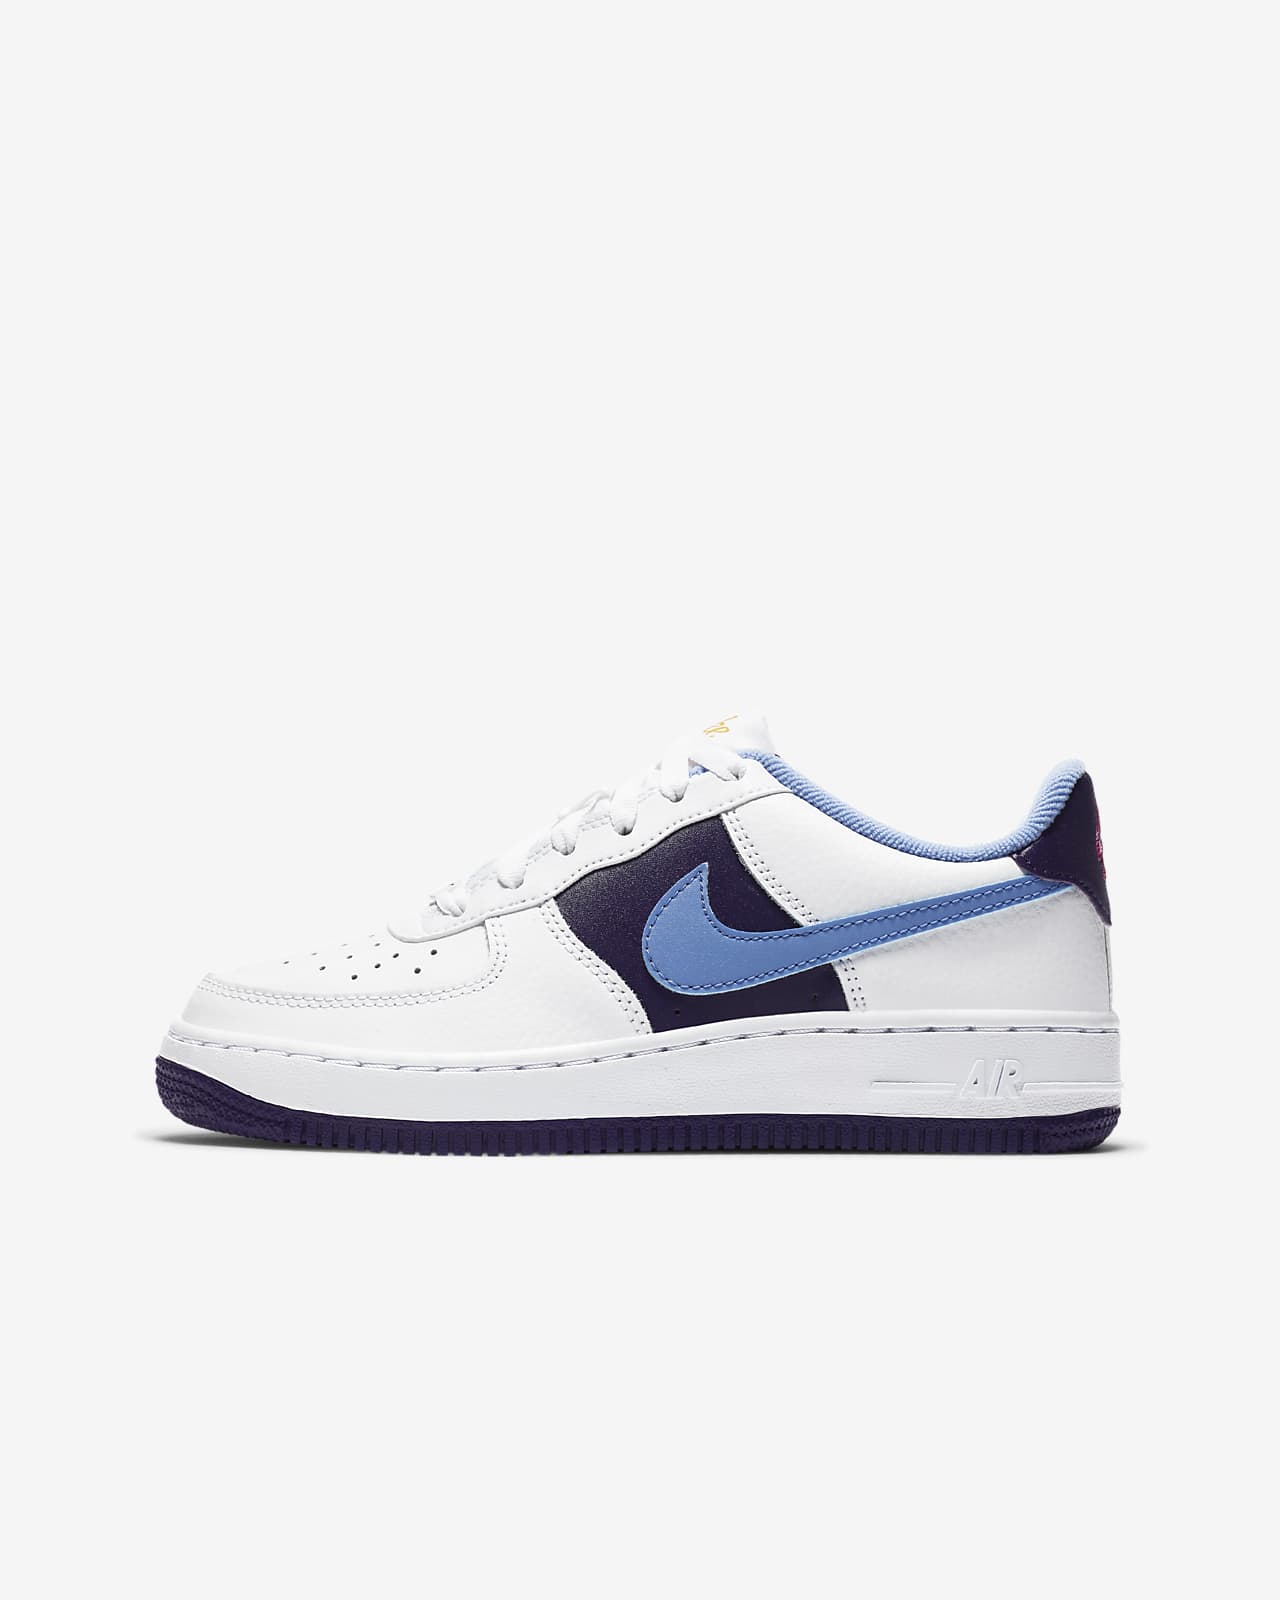 nike air force 1 lv8 size 6.5